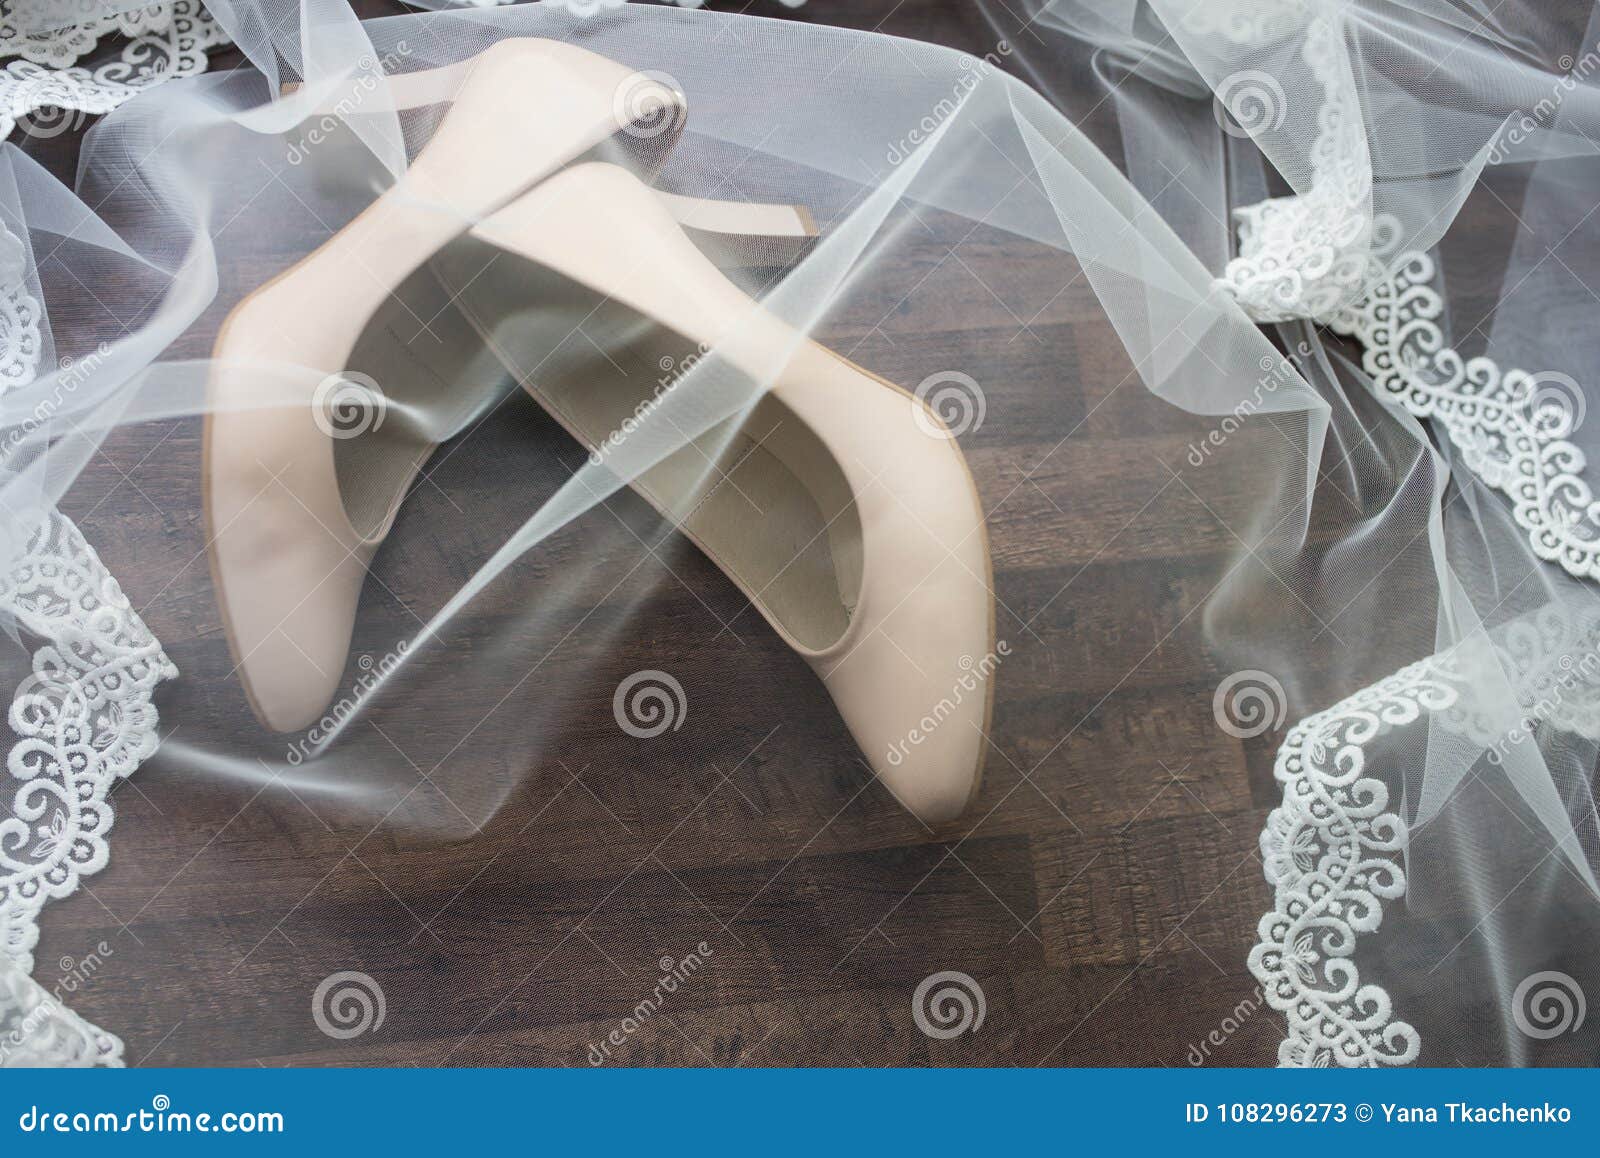 Beige Bridal Shoes are Covered with a Veil. Stock Image - Image of ...